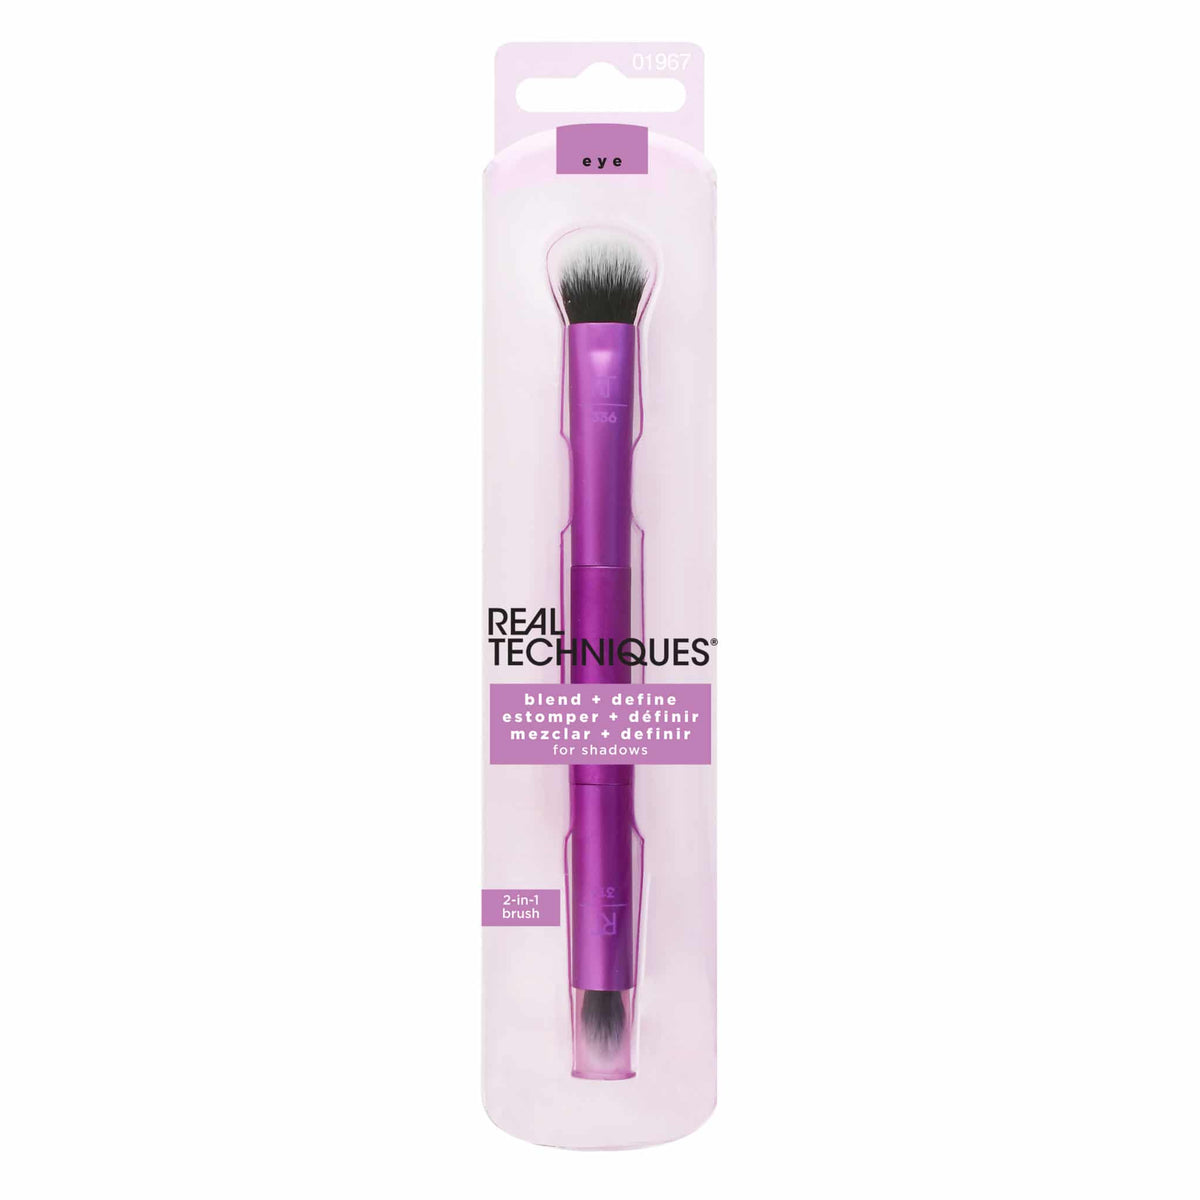 Real Techniques Eye Shade & Blend Makeup Brush Trio, For Eyeshadow & Liner,  Makeup Tools for Shaping & Grooming Brows, Defined Makeup Look, Synthetic